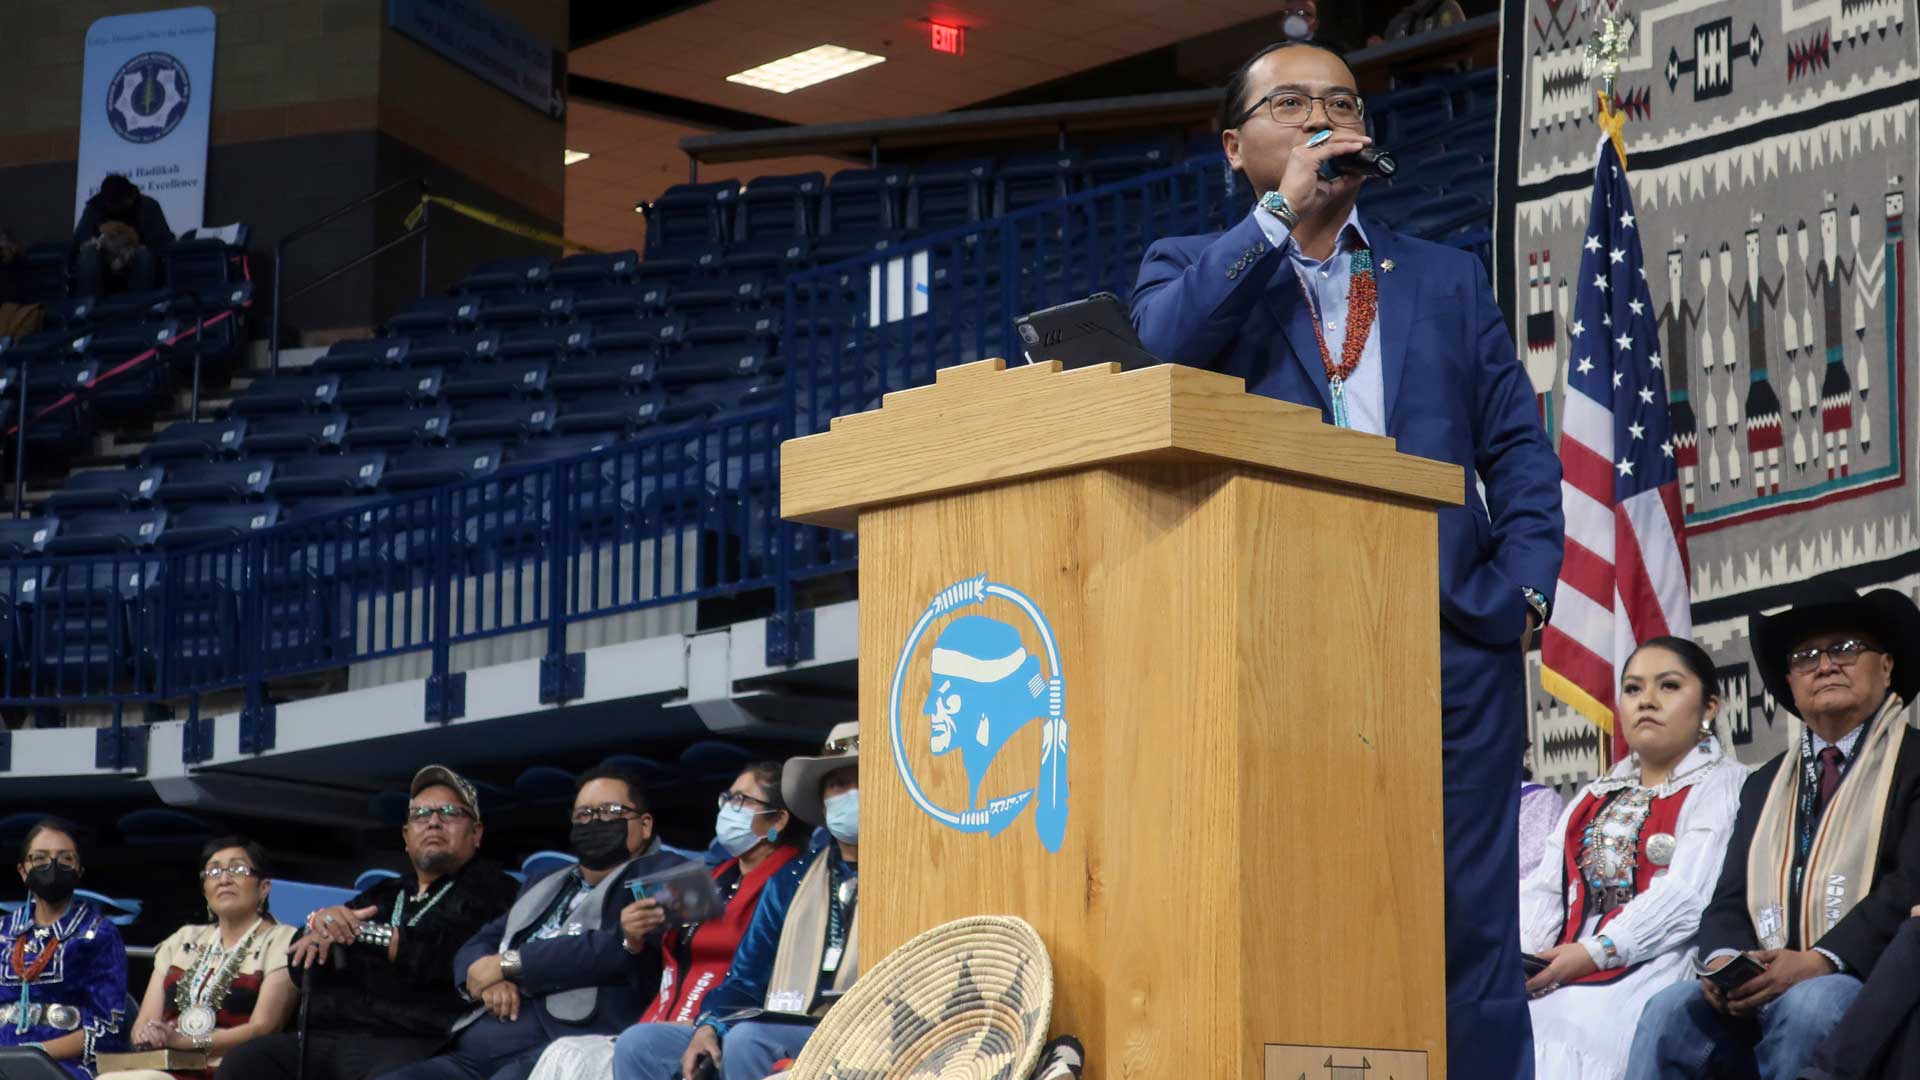 Navajo President Buu Nygren delivers his inaugural speech Tuesday, Jan. 10, 2023, in Fort Defiance, Ariz. Navajo President Buu Nygren is the youngest person elected to the position, while Vice President Richelle Montoya is the first woman to hold that office. (AP Photo/Felicia Fonseca)